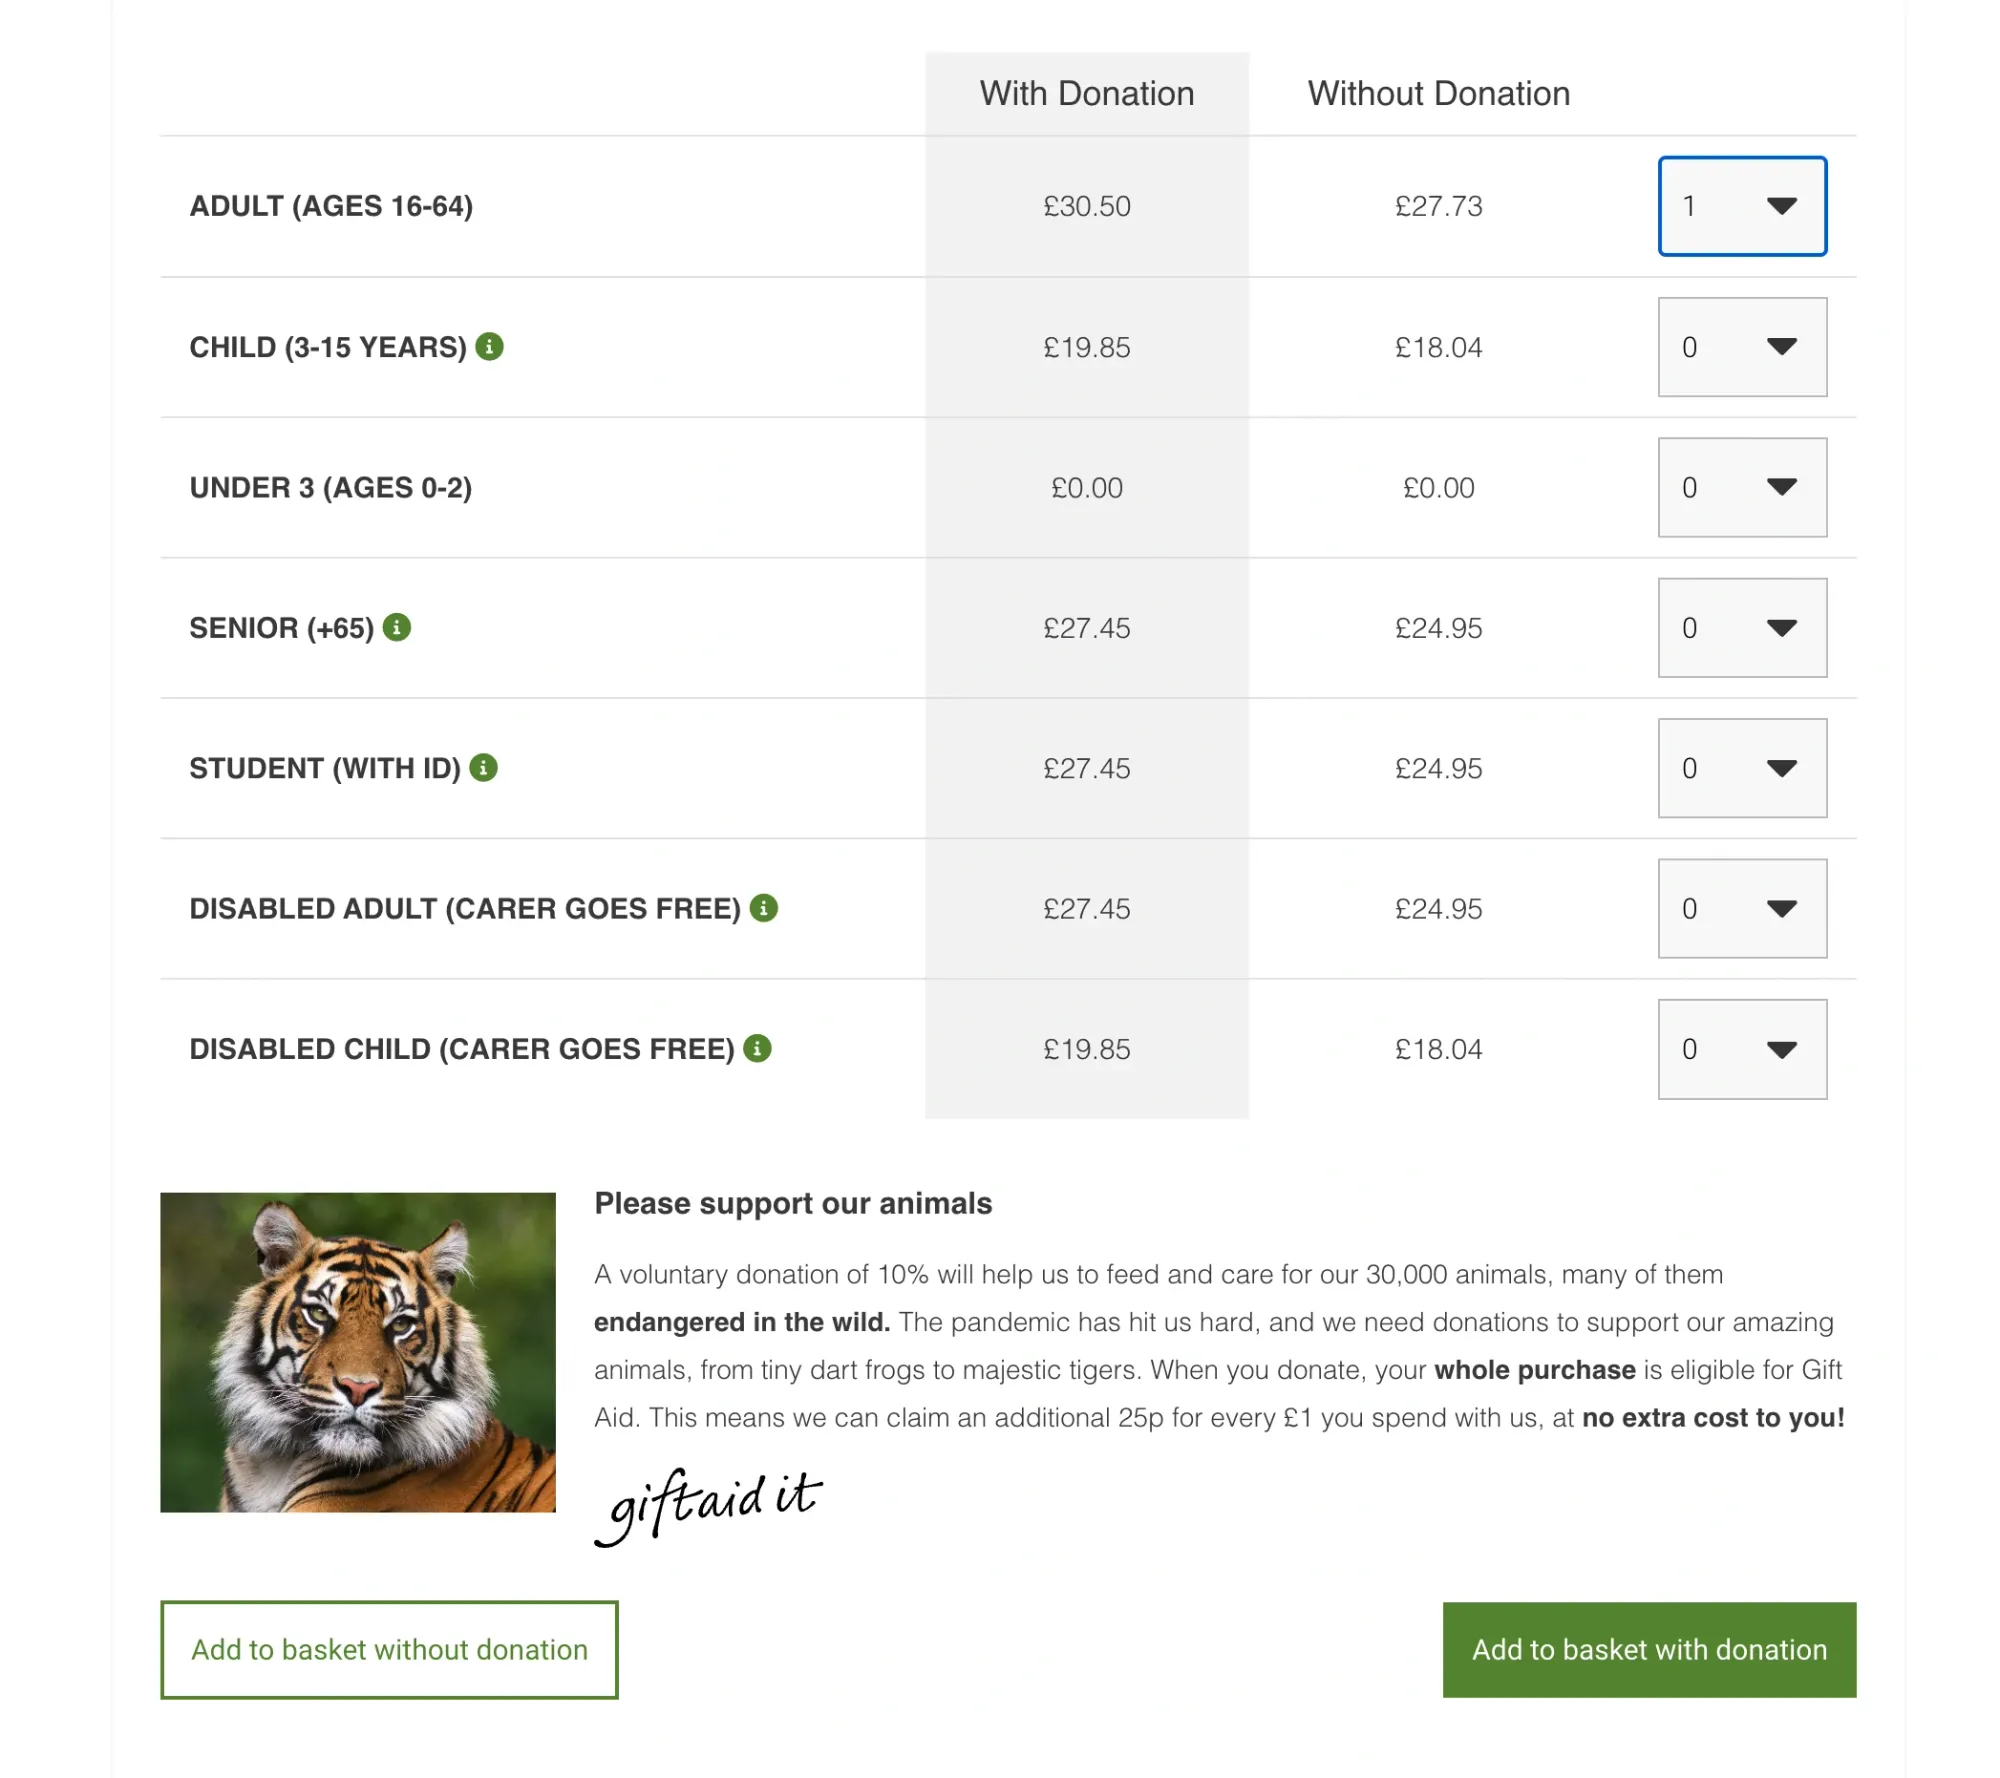 London Zoo's ticket purchase process